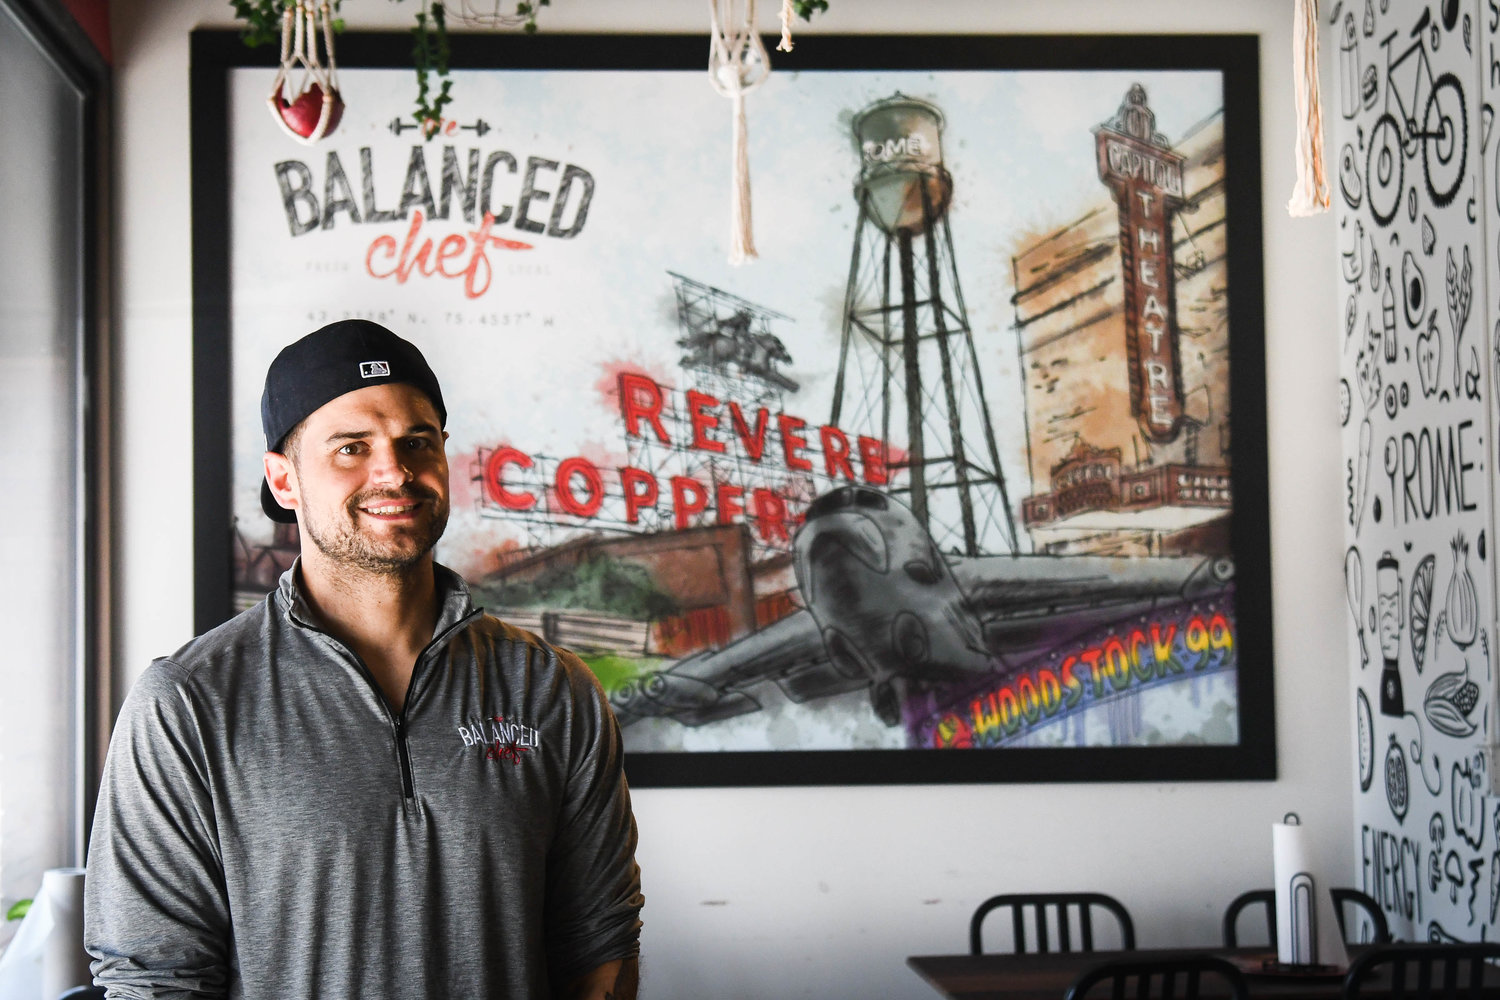 Brian Donovan, founder of The Balanced Chef, has been in business since 2015 and has provided readily available, healthy fast food for people in the area and state. This photo was taken prior to The Balanced Chef’s transformations as a part of the Food Network TV show, “Restaurant: Impossible.”